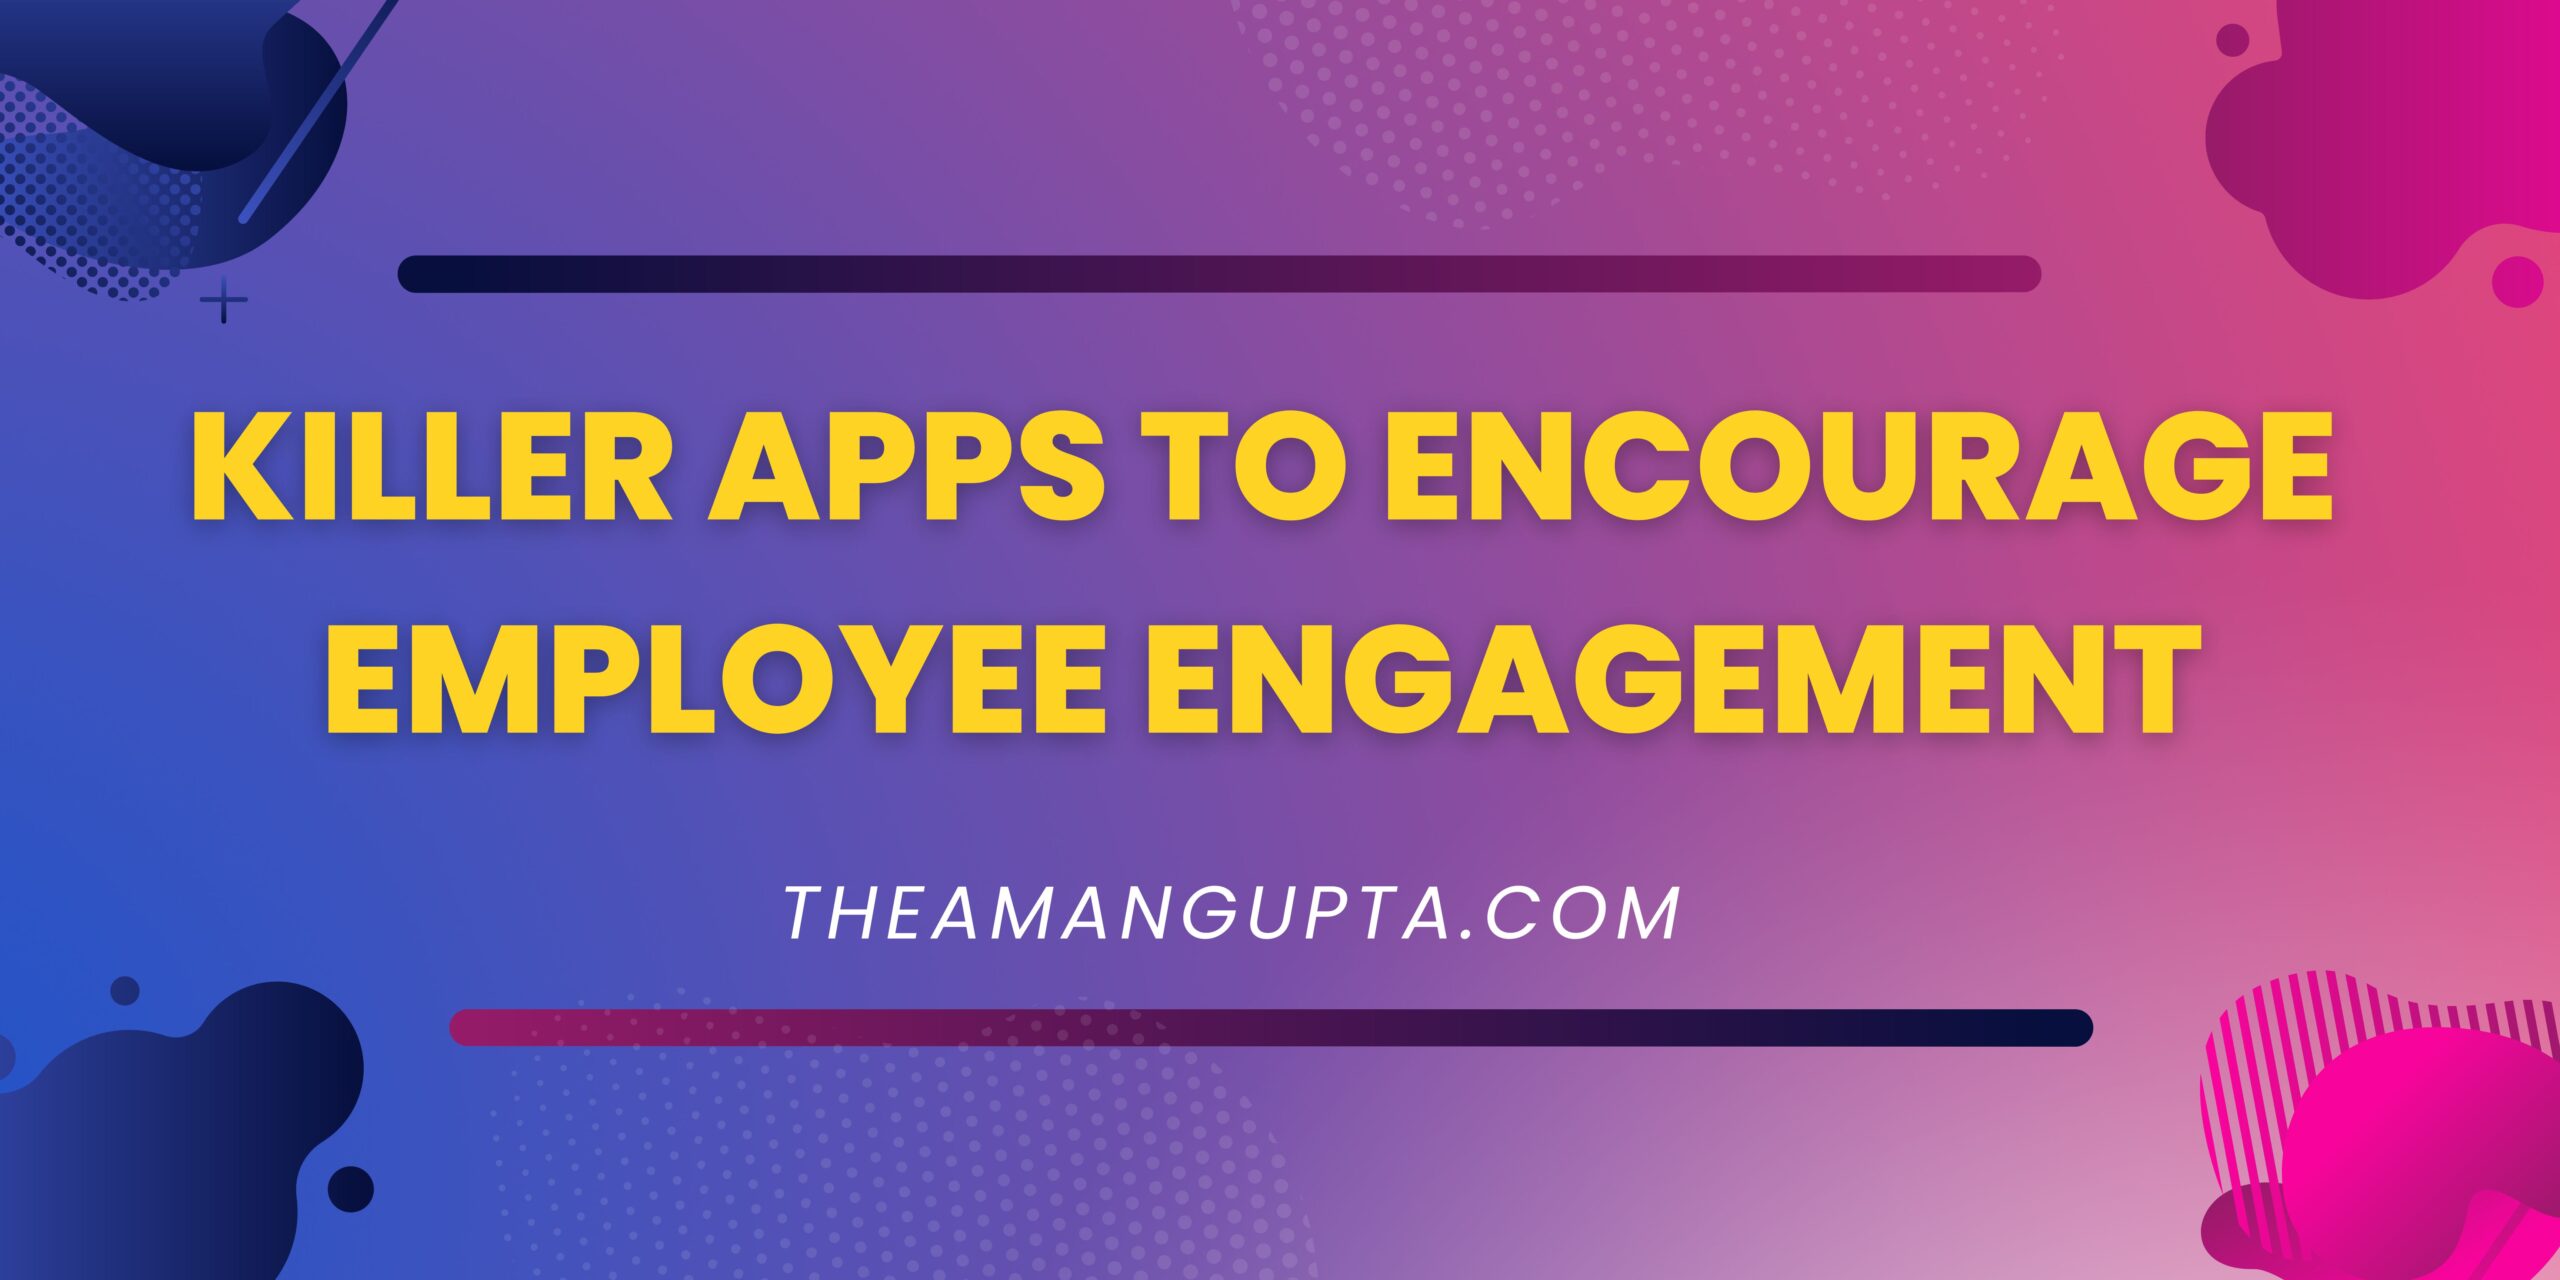 Killer Apps To Encourage Employee Engagement|Employee Engagement|Theamangupta|Theamangupta